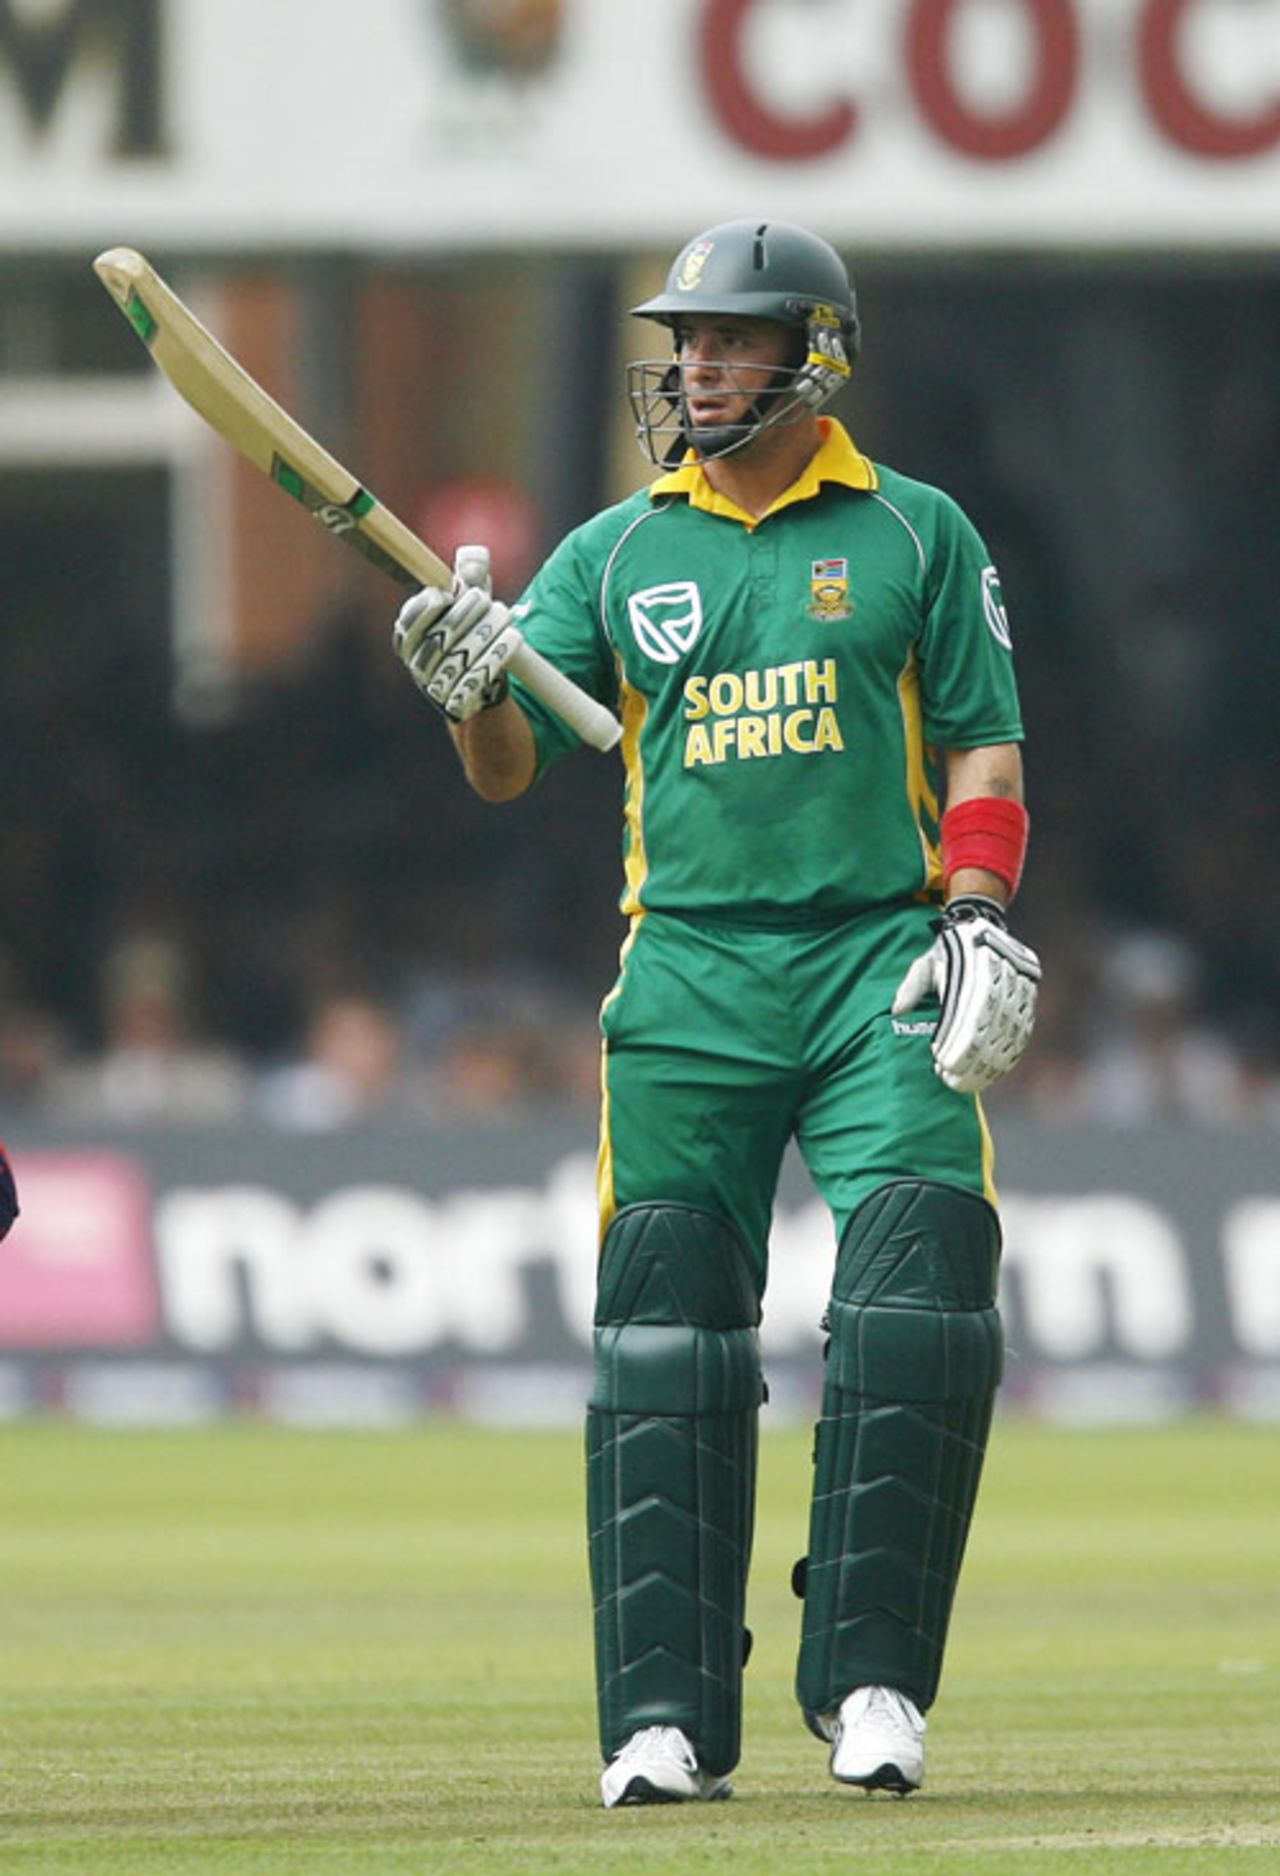 Herschelle Gibbs acknowledges the applause for his fifty, England v South Africa, 4th ODI, Lord's, August 31, 2008